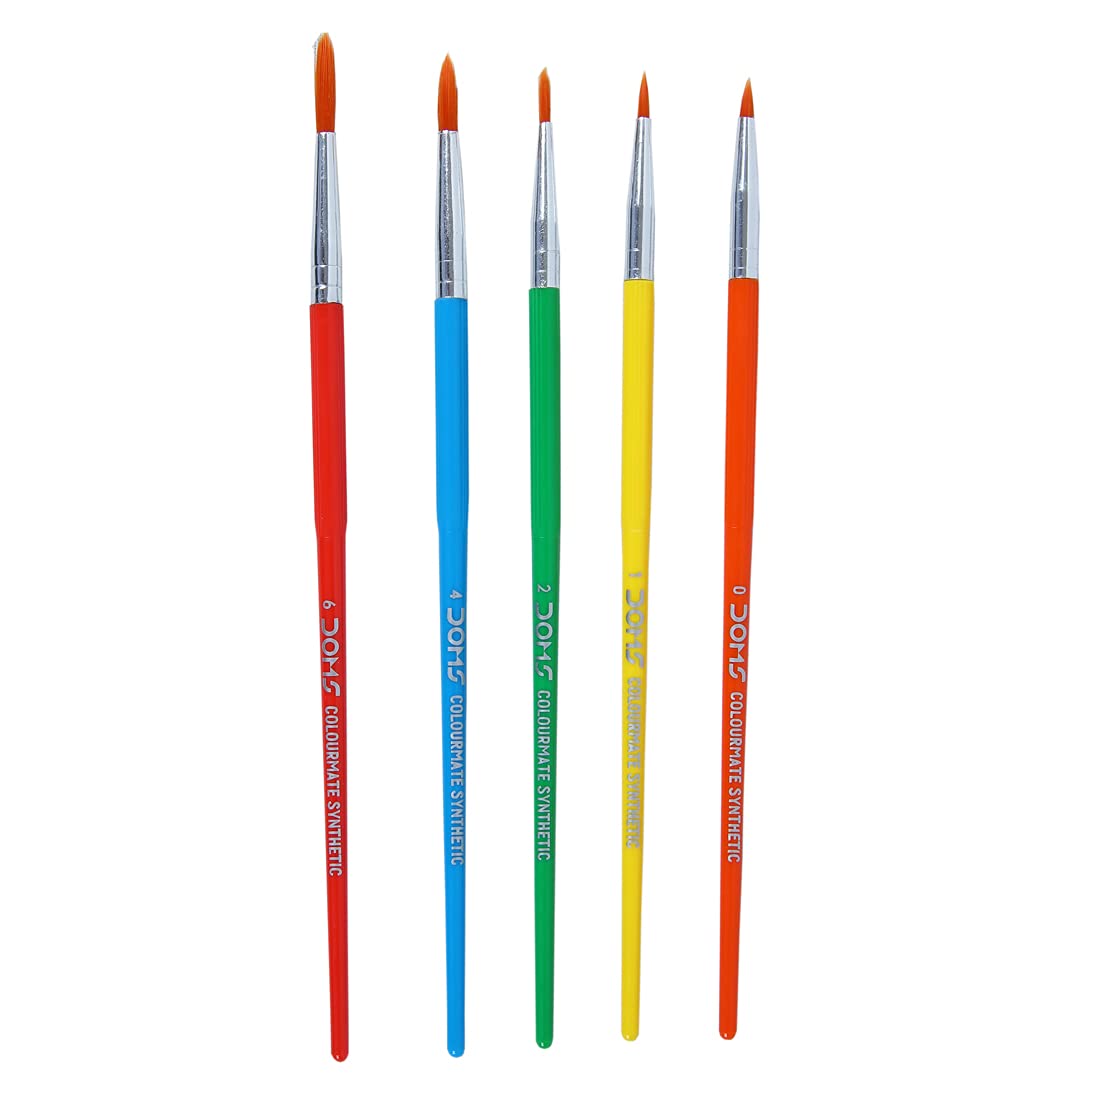 DOMS Colourmate Synthetic Paint Brush Set - 5 Different Sizes for Artists of All Ages